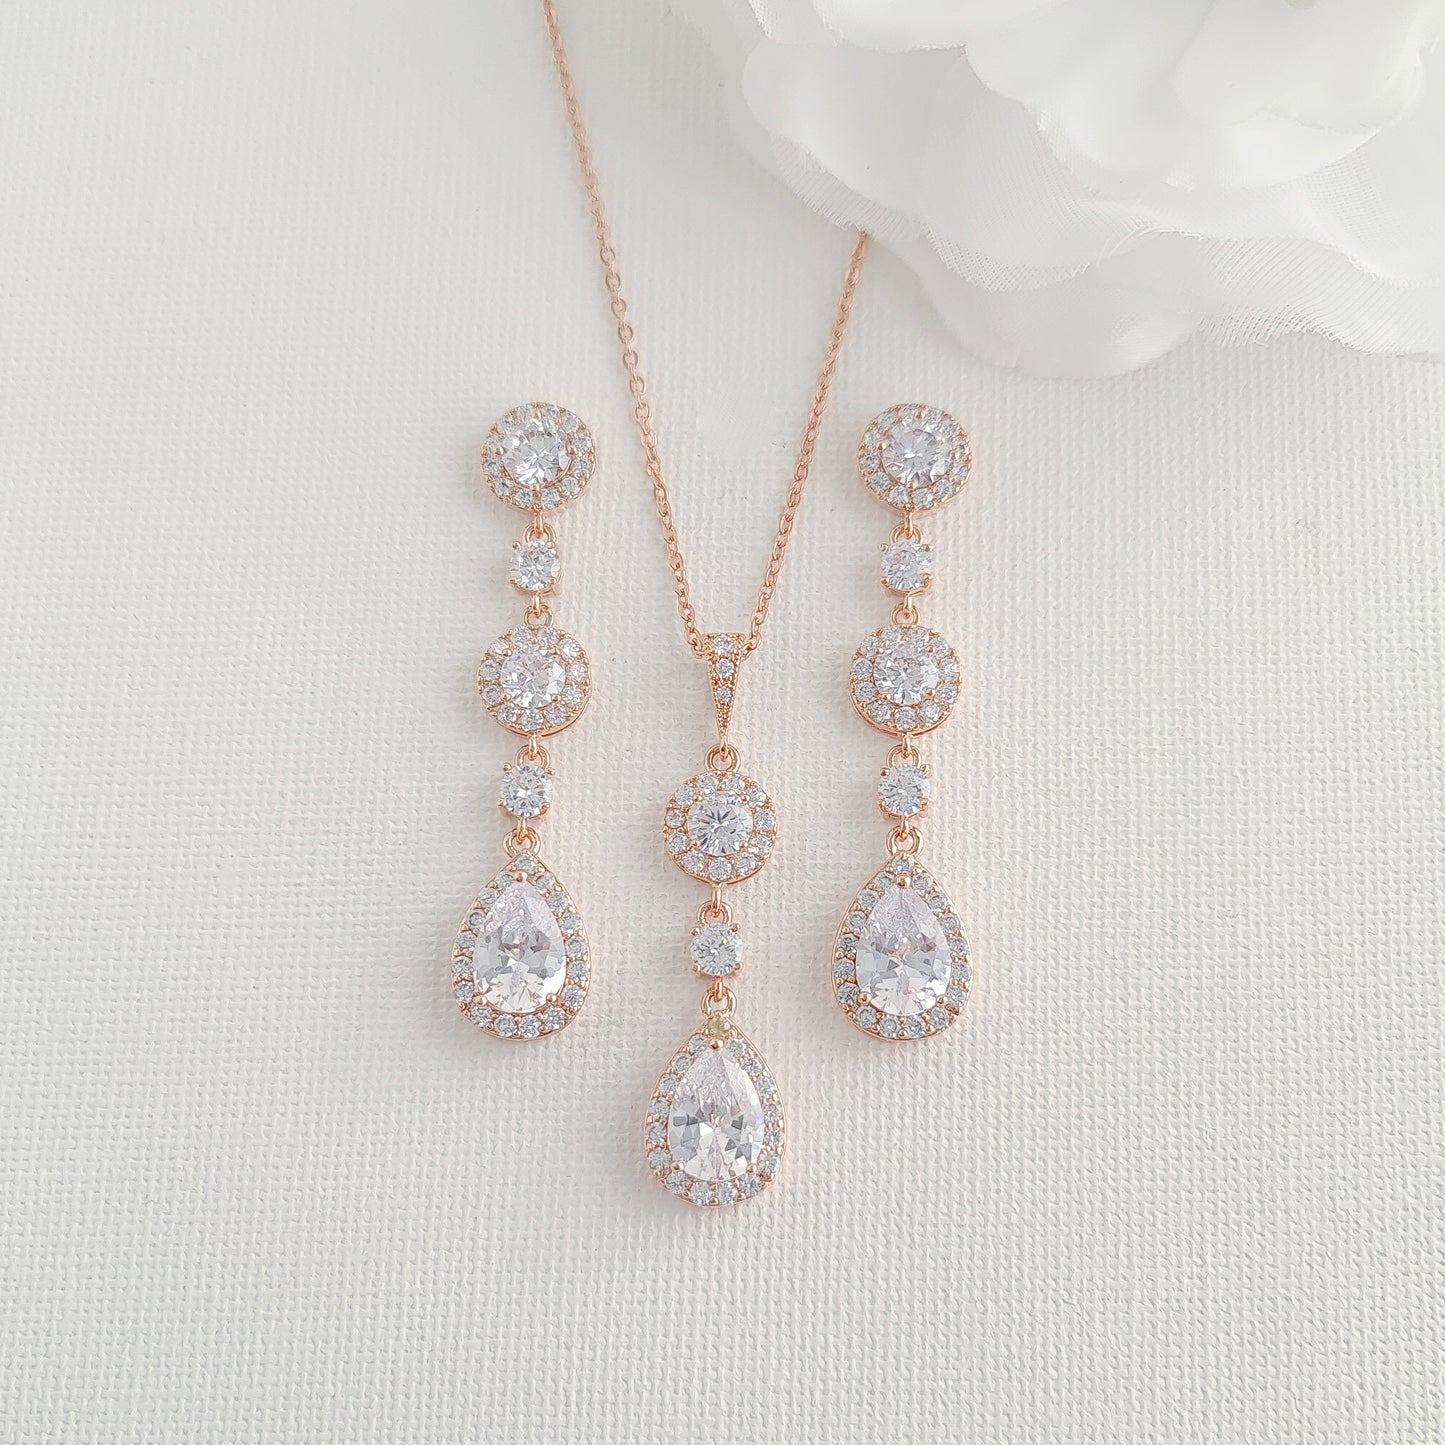 Jewelry Set of Gold Earrings Necklace Bracelet for Your Wedding Day-Reagan